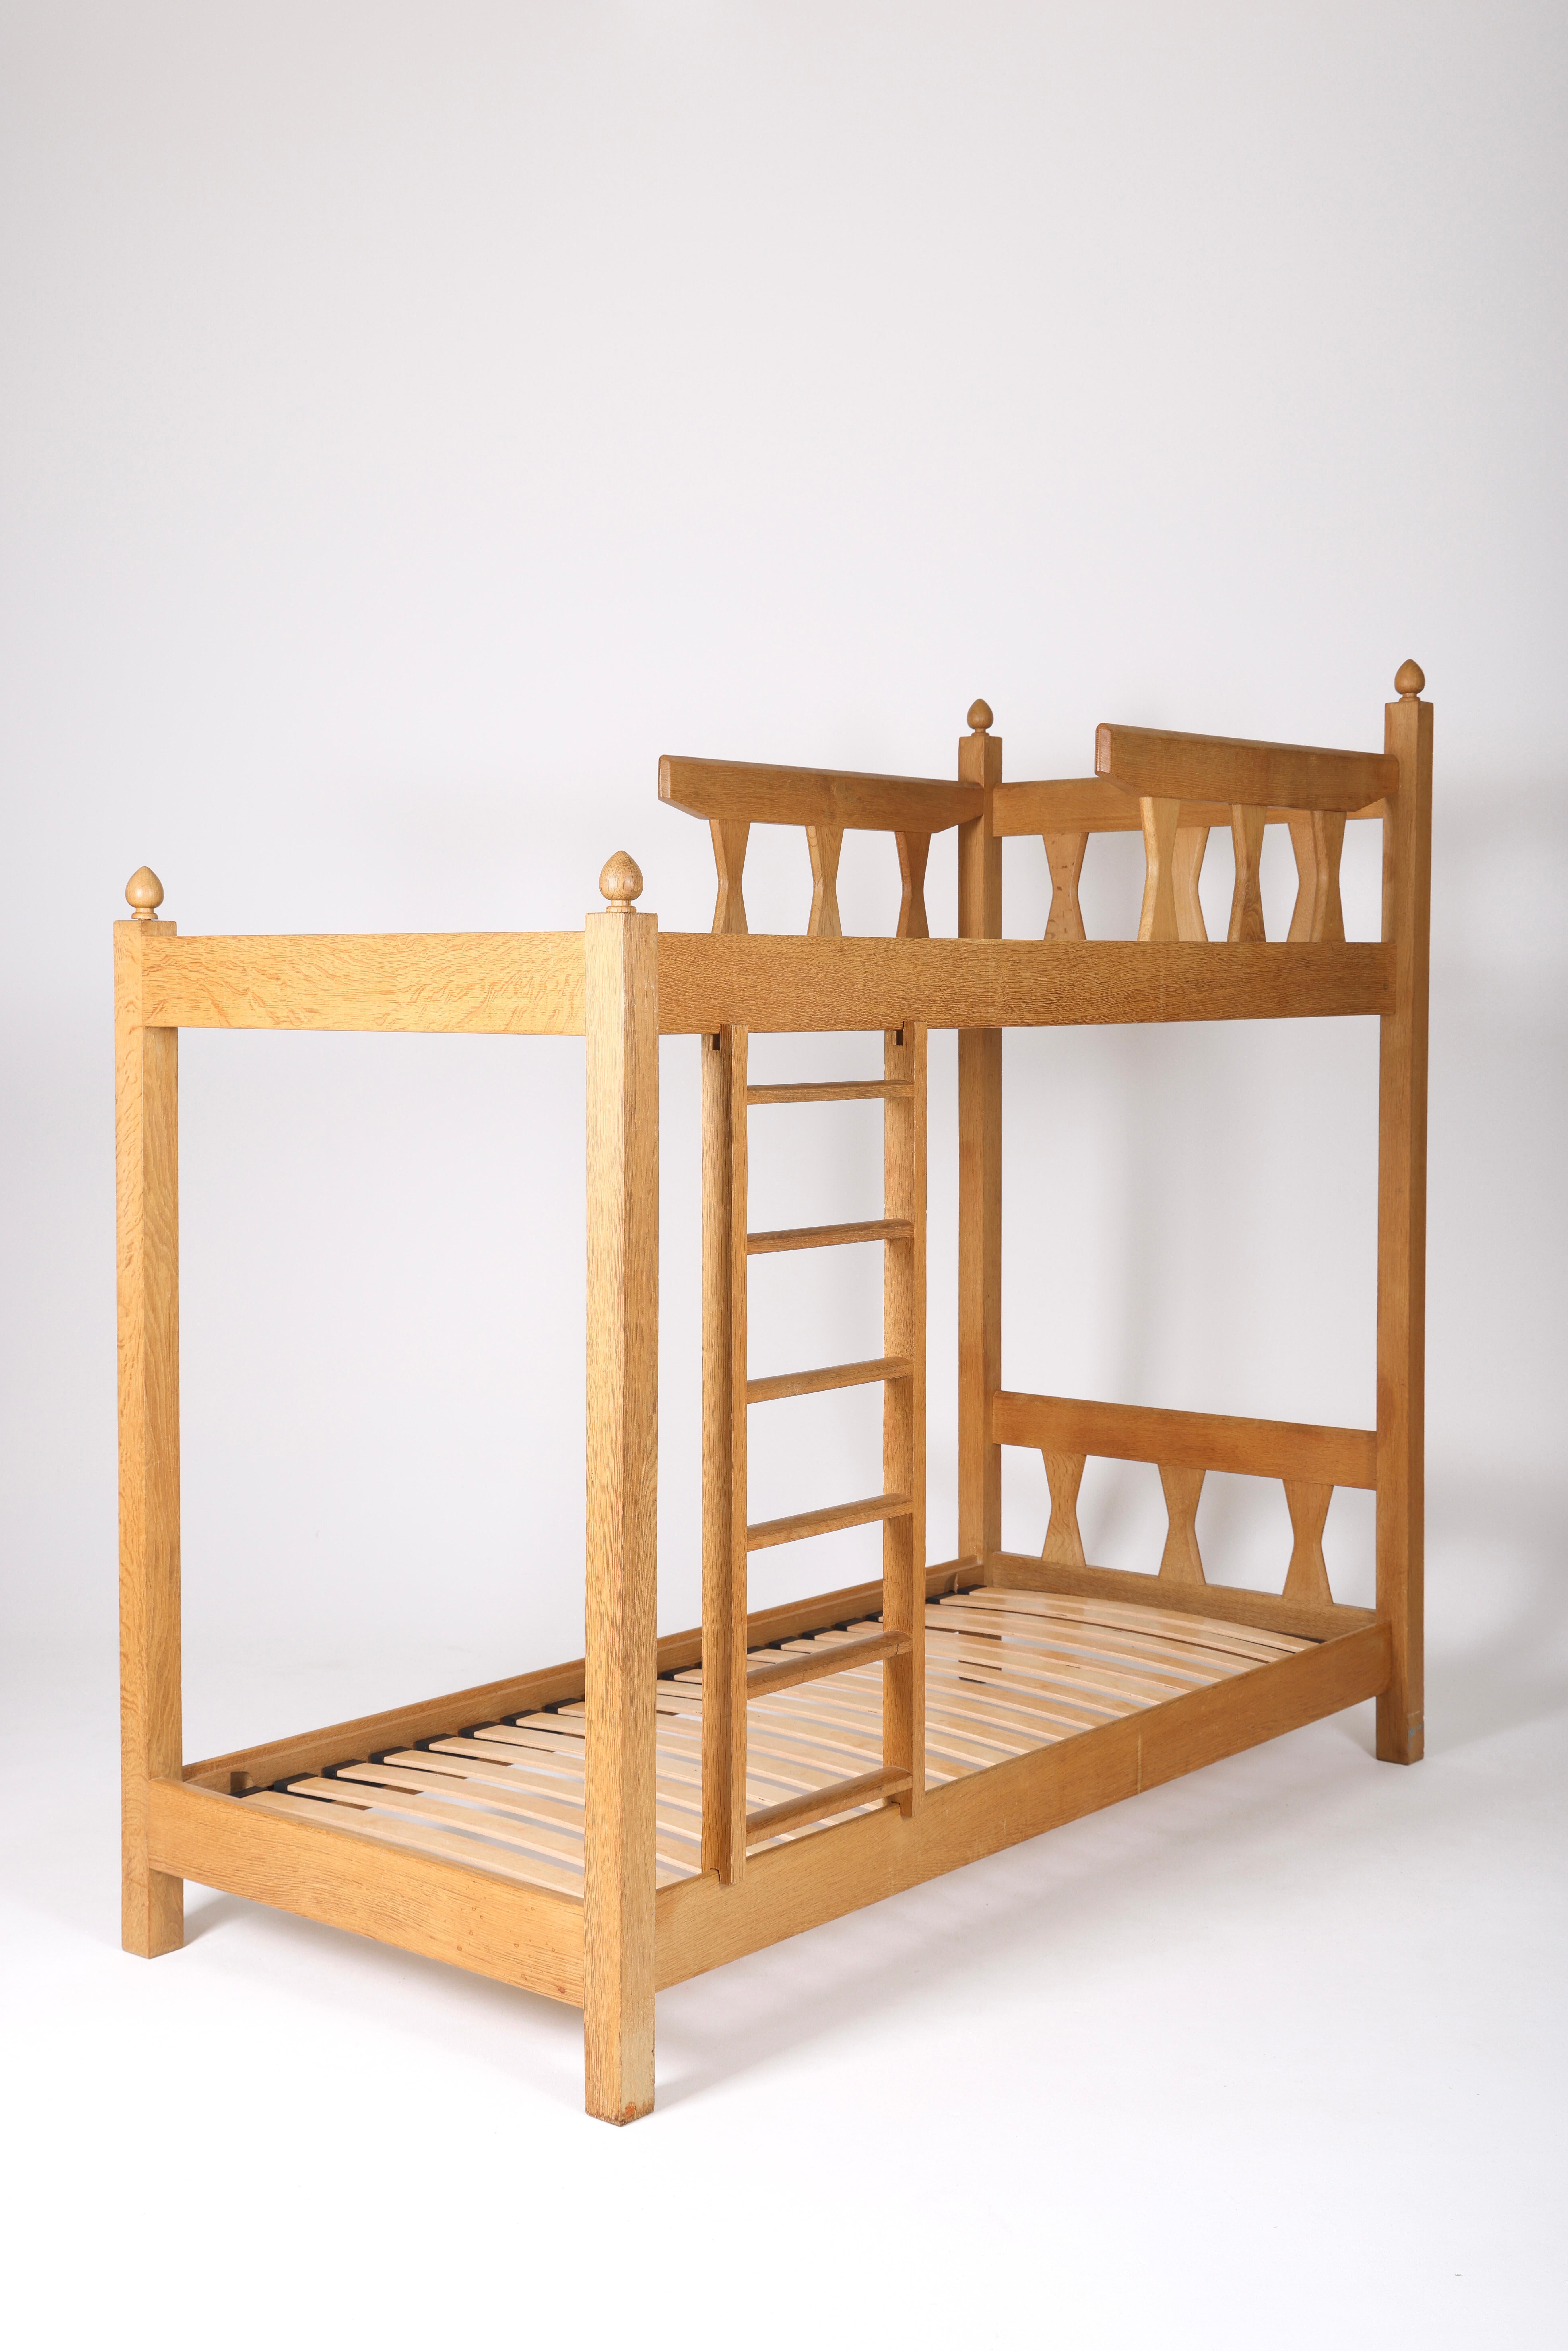 20th Century Mid-century Solid wood bunk bed by French designers Guillerme and Chambron